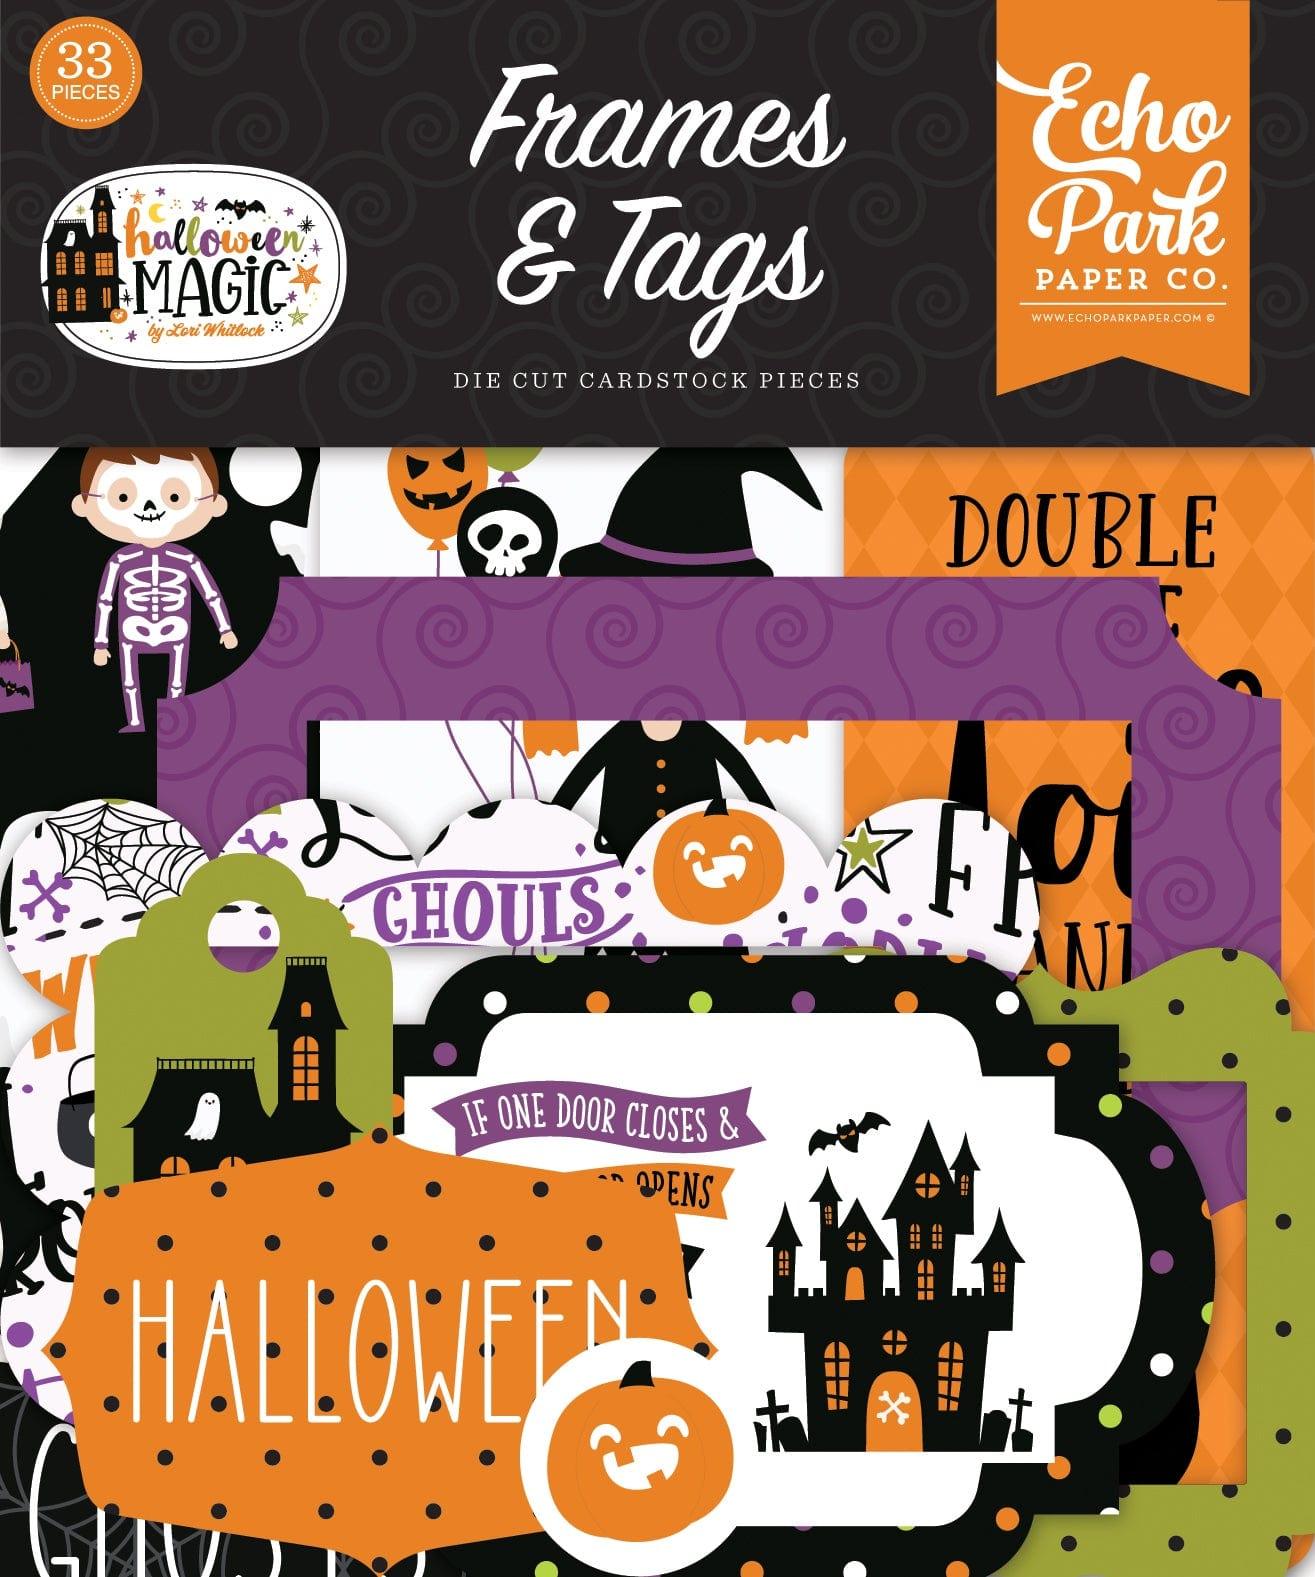 Halloween Magic Collection 5 x 5 Scrapbook Tags & Frames Die Cuts by Echo Park Paper - Scrapbook Supply Companies